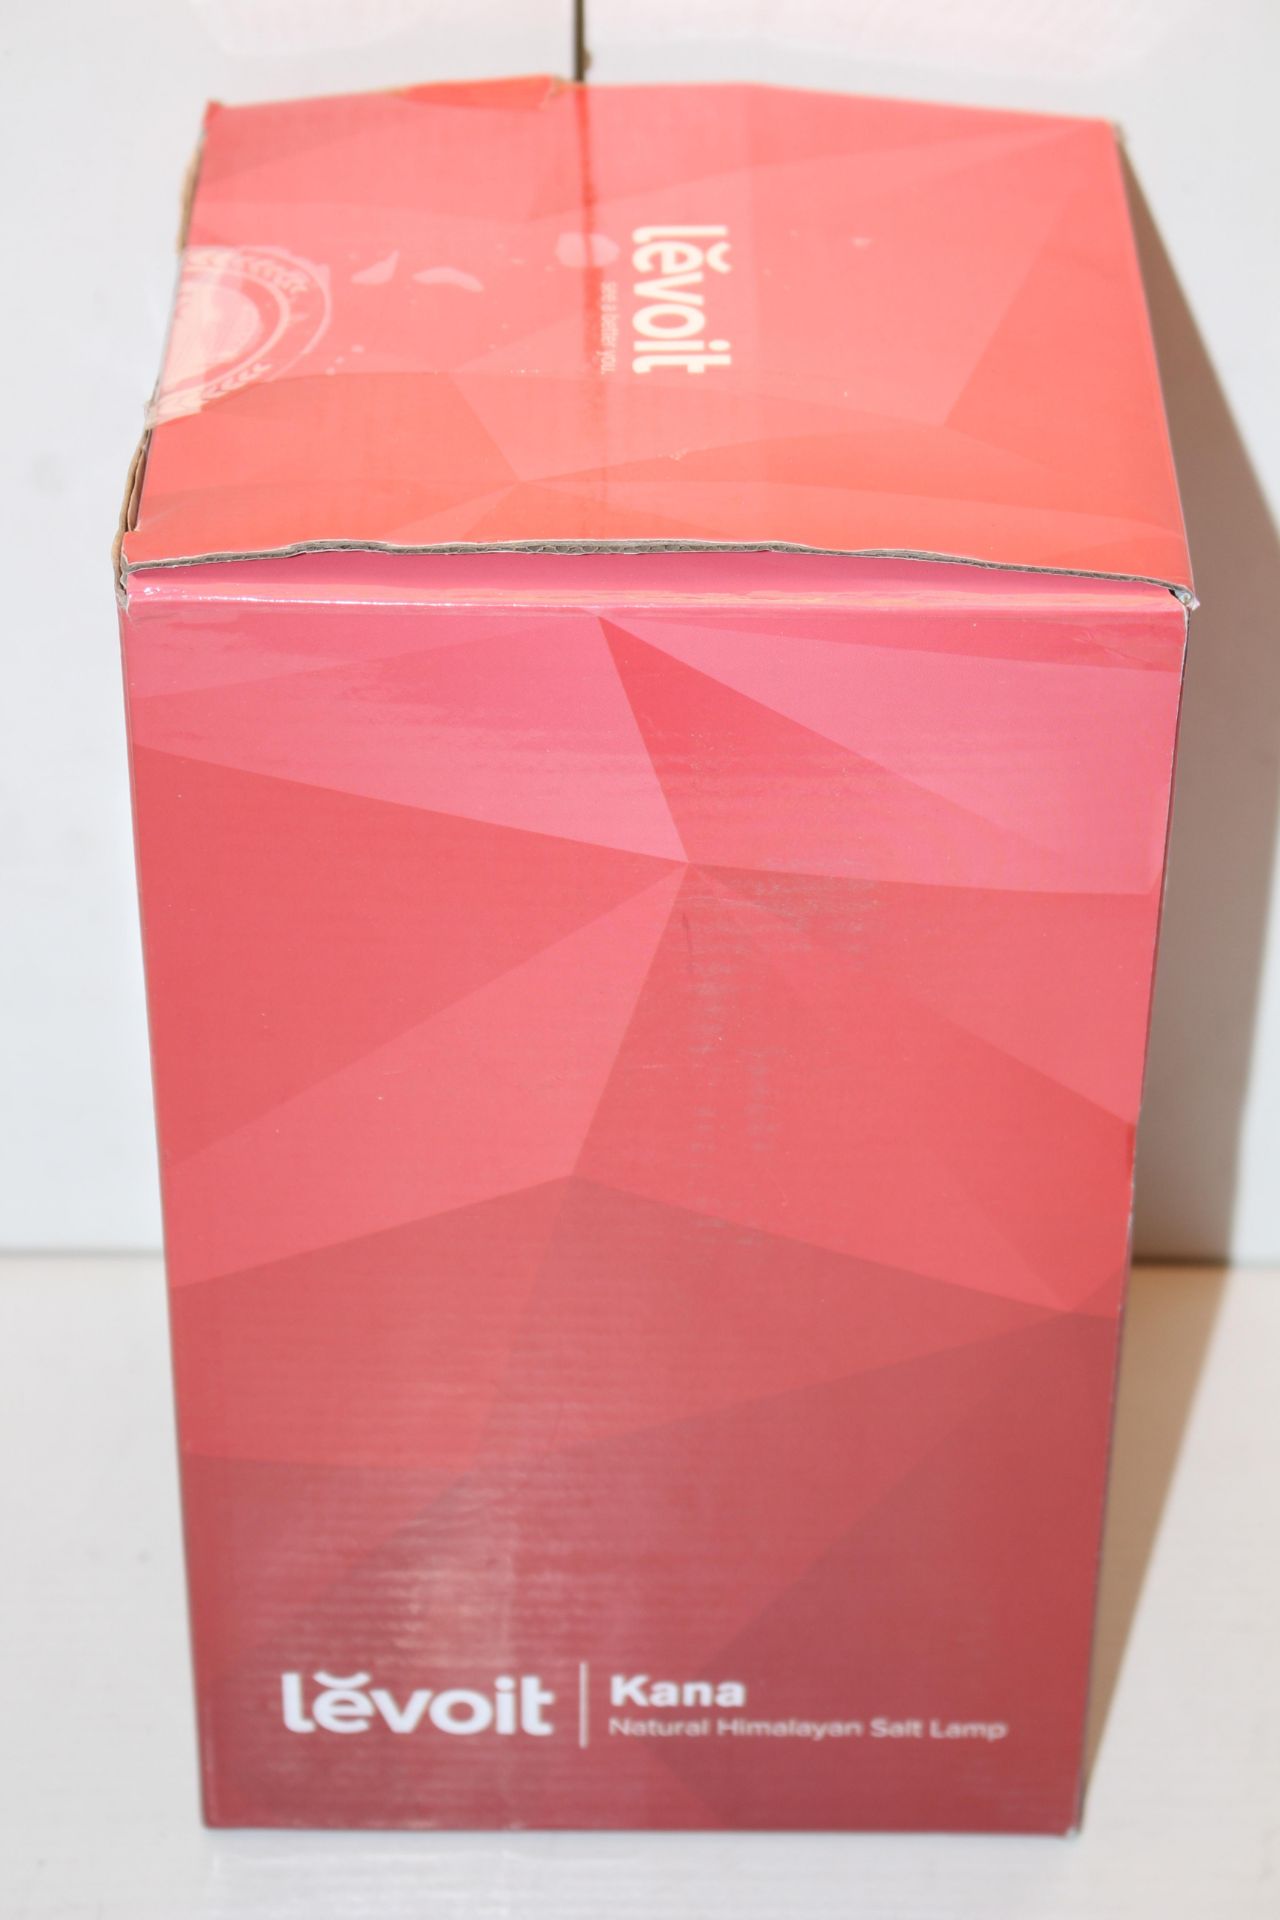 BOXED LEVOIT KANA NATURAL HIMALAYAN SALT LAMP RRP £28.94Condition ReportAppraisal Available on